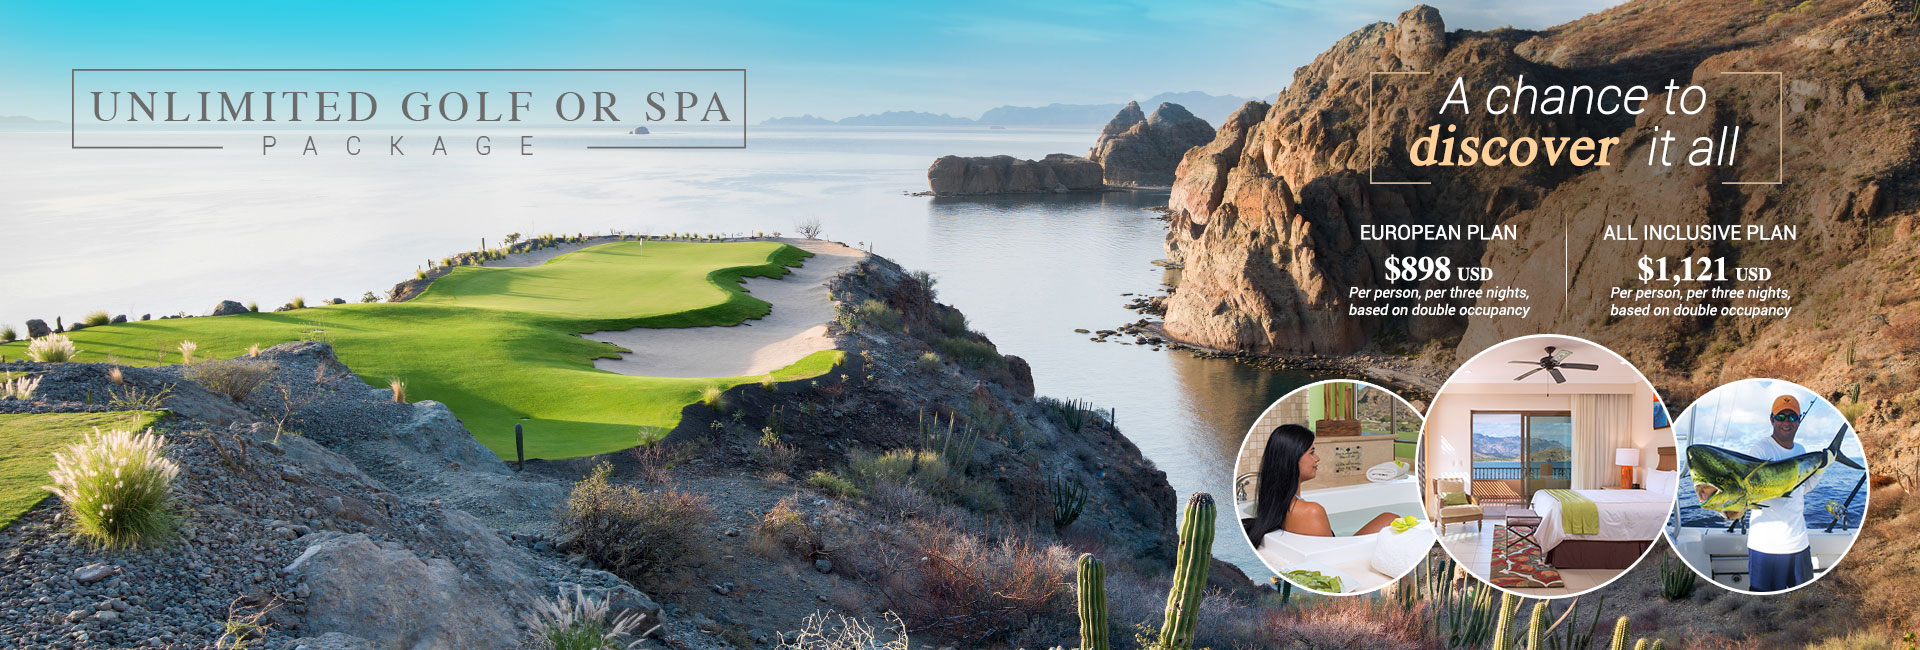 TPC Danzante Bay Unlimited Golf or Spa package